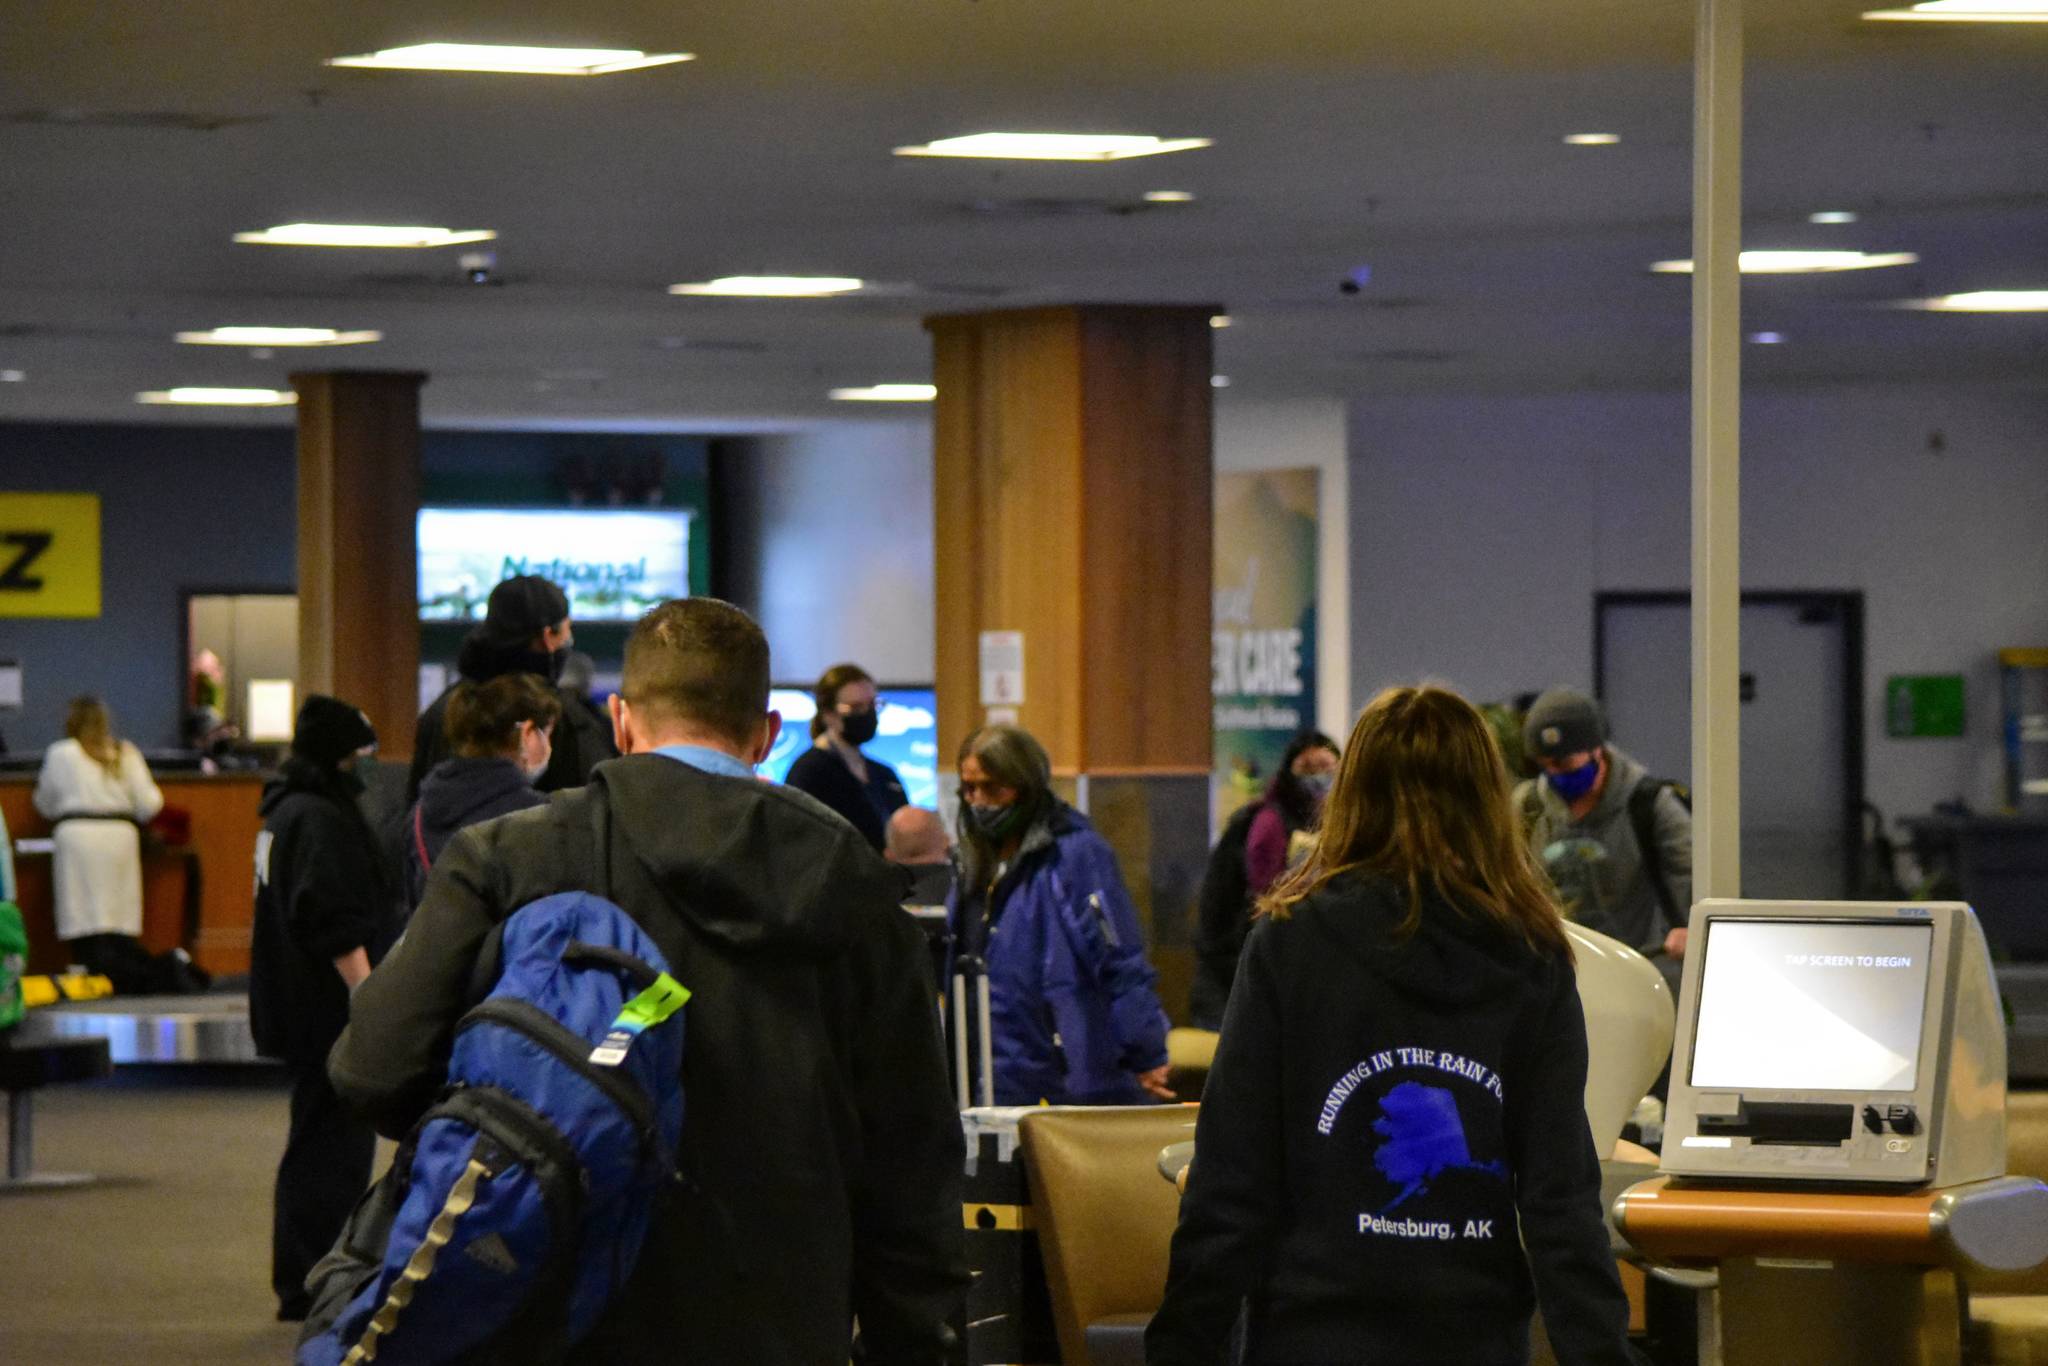 Aviation traffic at the Juneau International Airport was down 62% in 2020. Here, travelers arrive at the Juneau International Airport on Wednesday, Nov. 25, 2020, one of many days when air travel was much lower than historical norms. (Peter Segall / Juneau Empire)